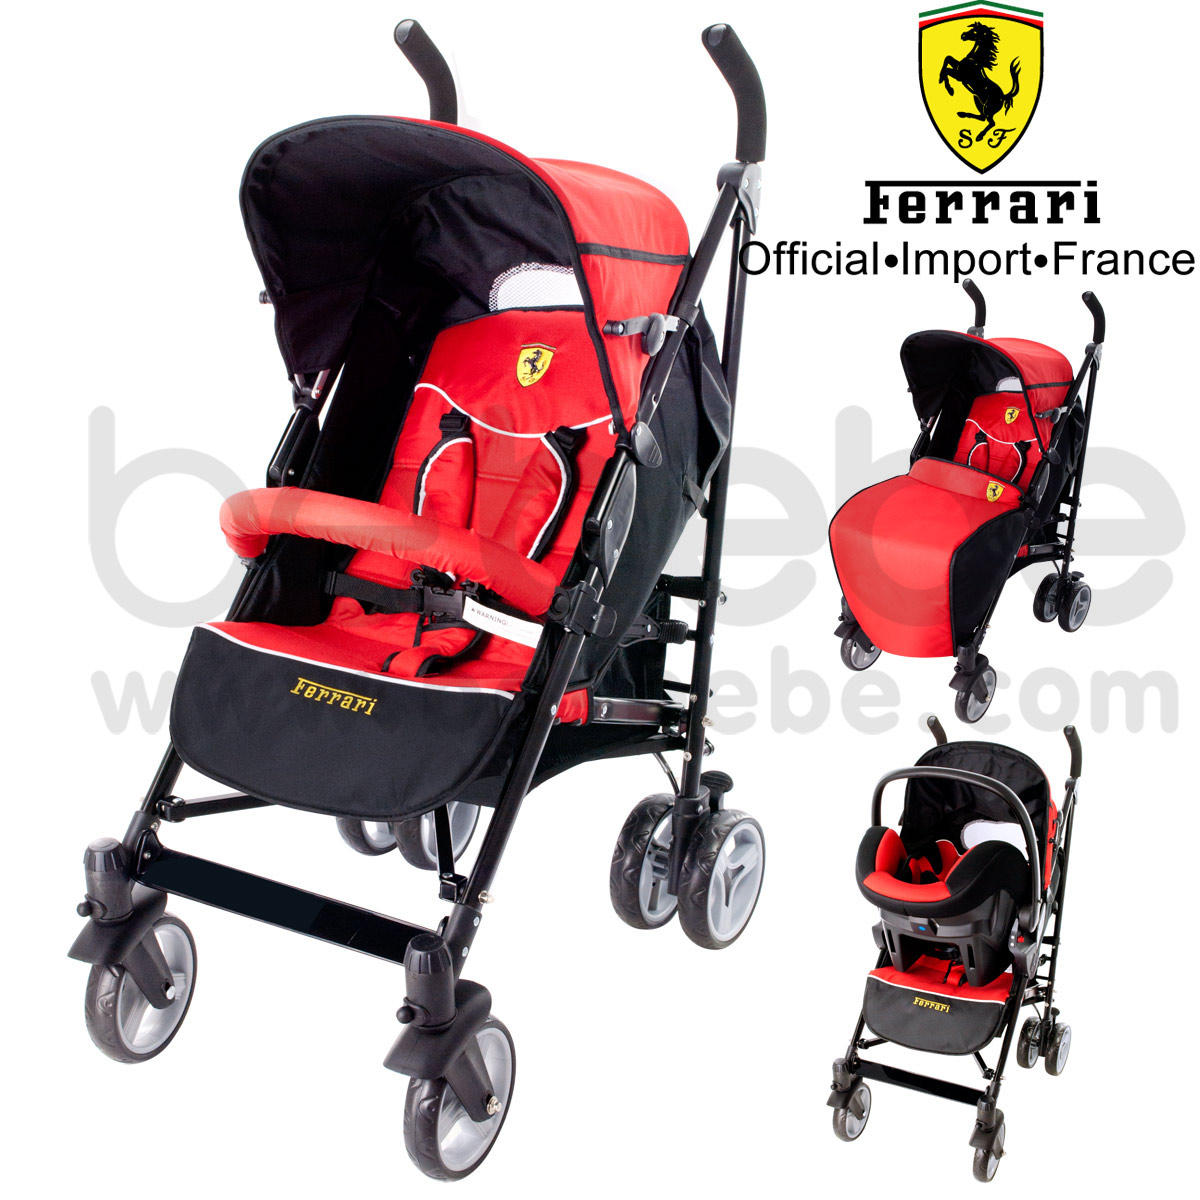  Ferrari : Stroller P7 Subway+Foot Cover+CarSeat Be One (Red)